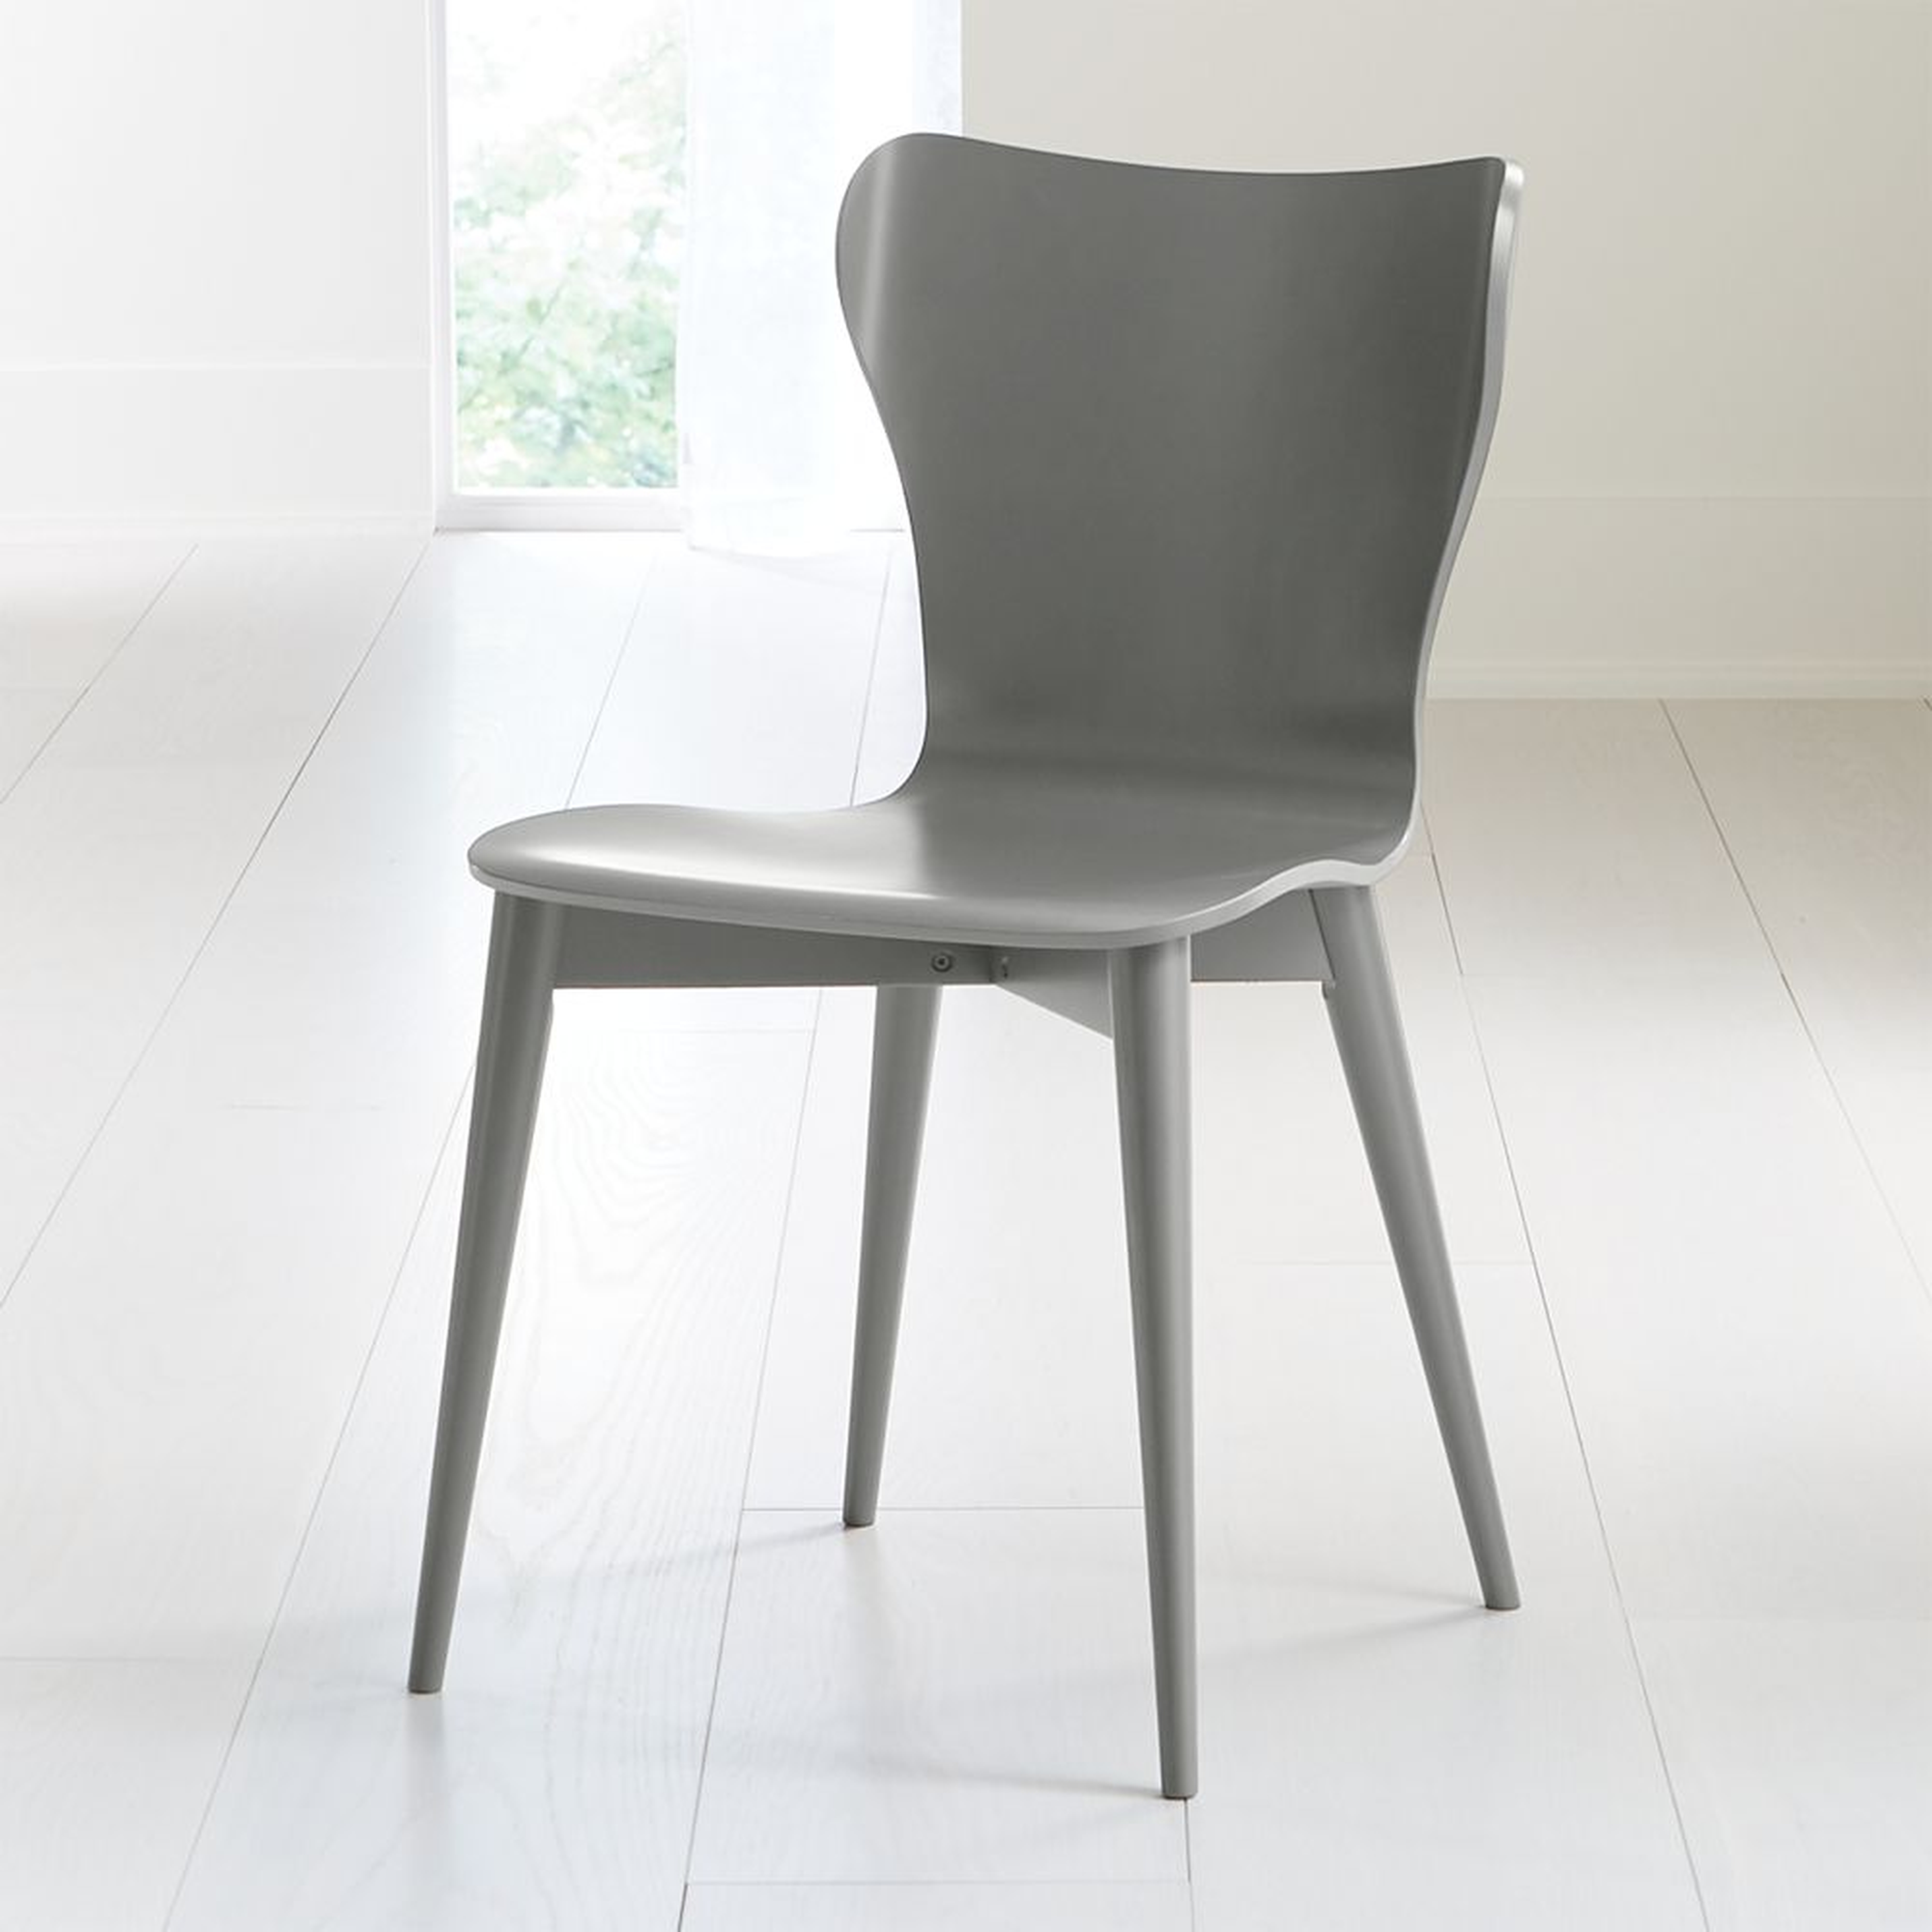 Brera Grey Bentwood Dining Chair - Crate and Barrel